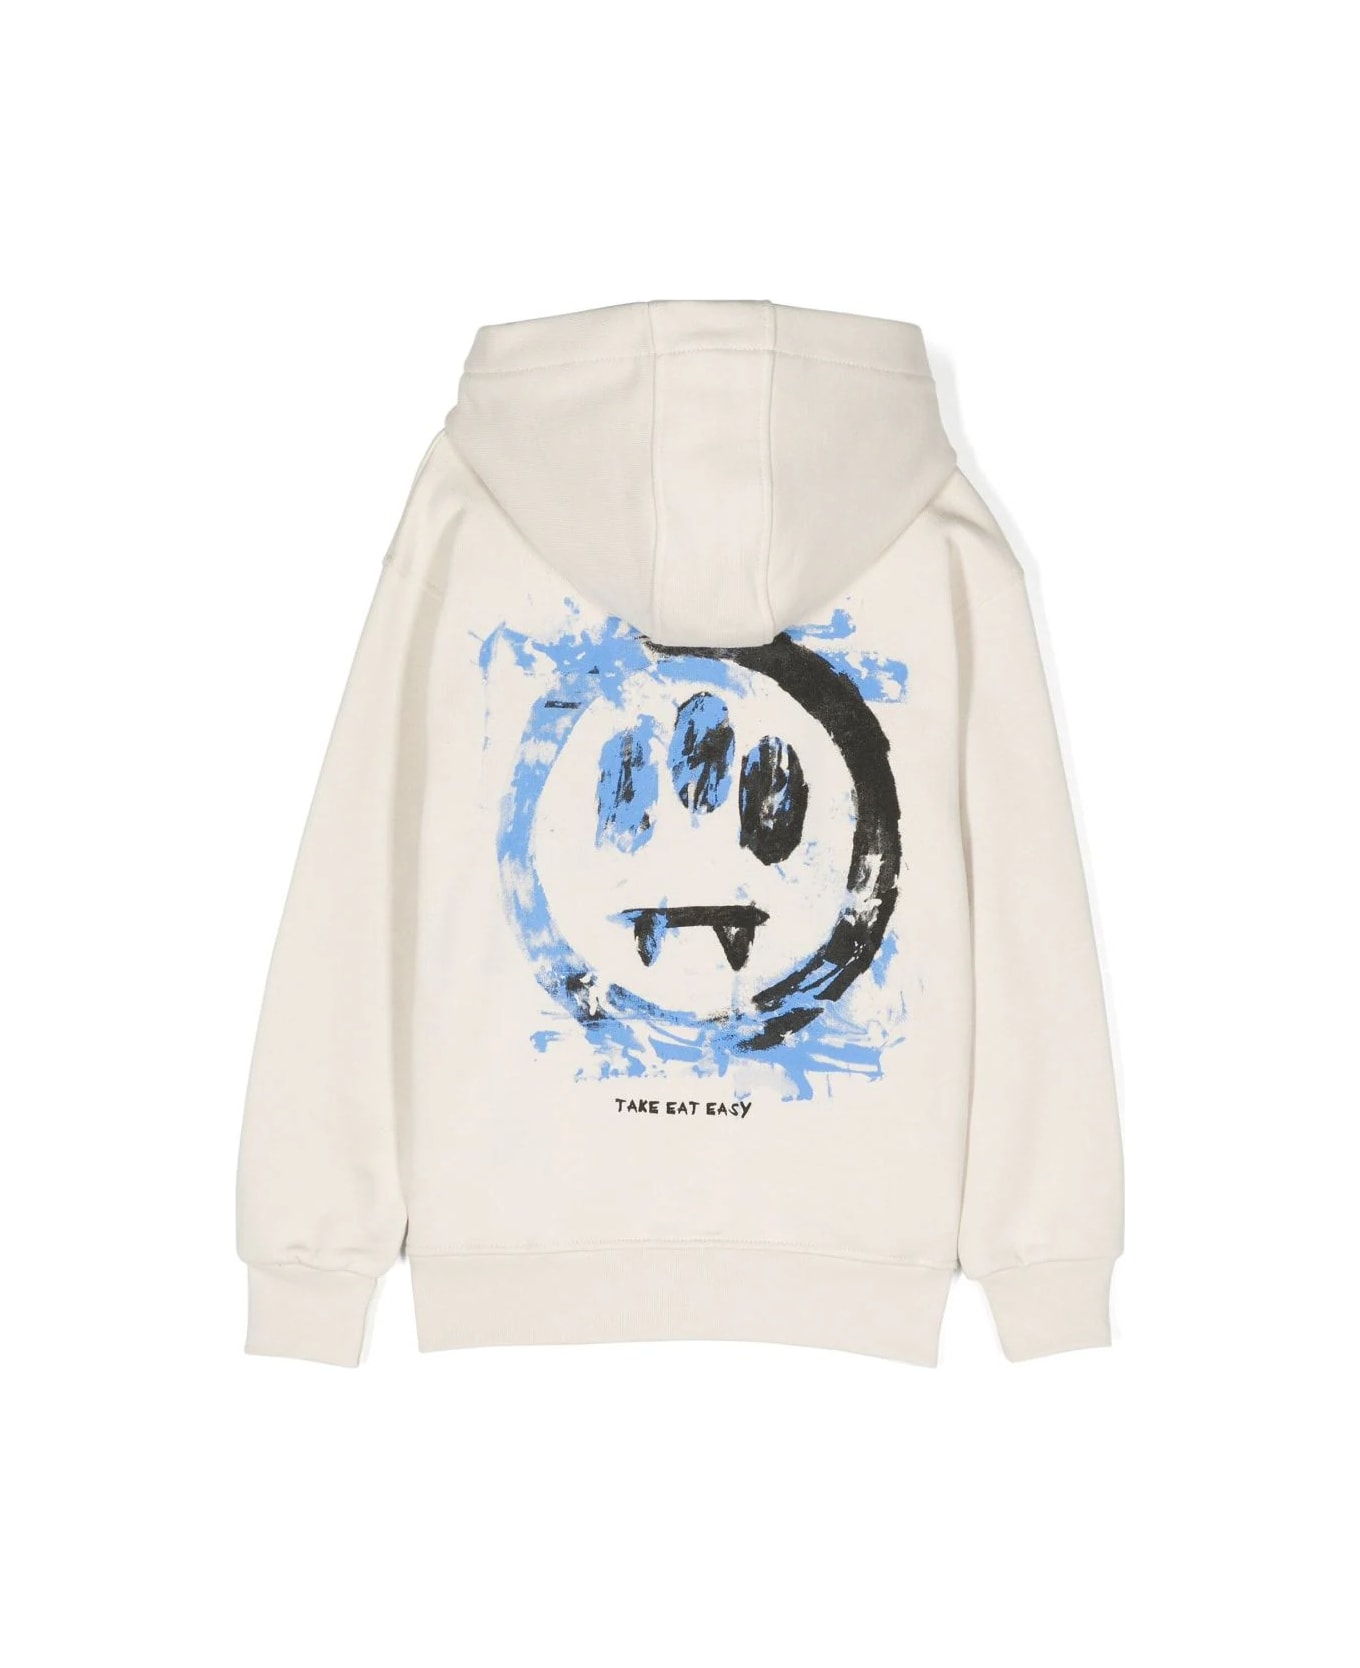 Barrow Dove Hoodie With Logo And Lettering - Bianco